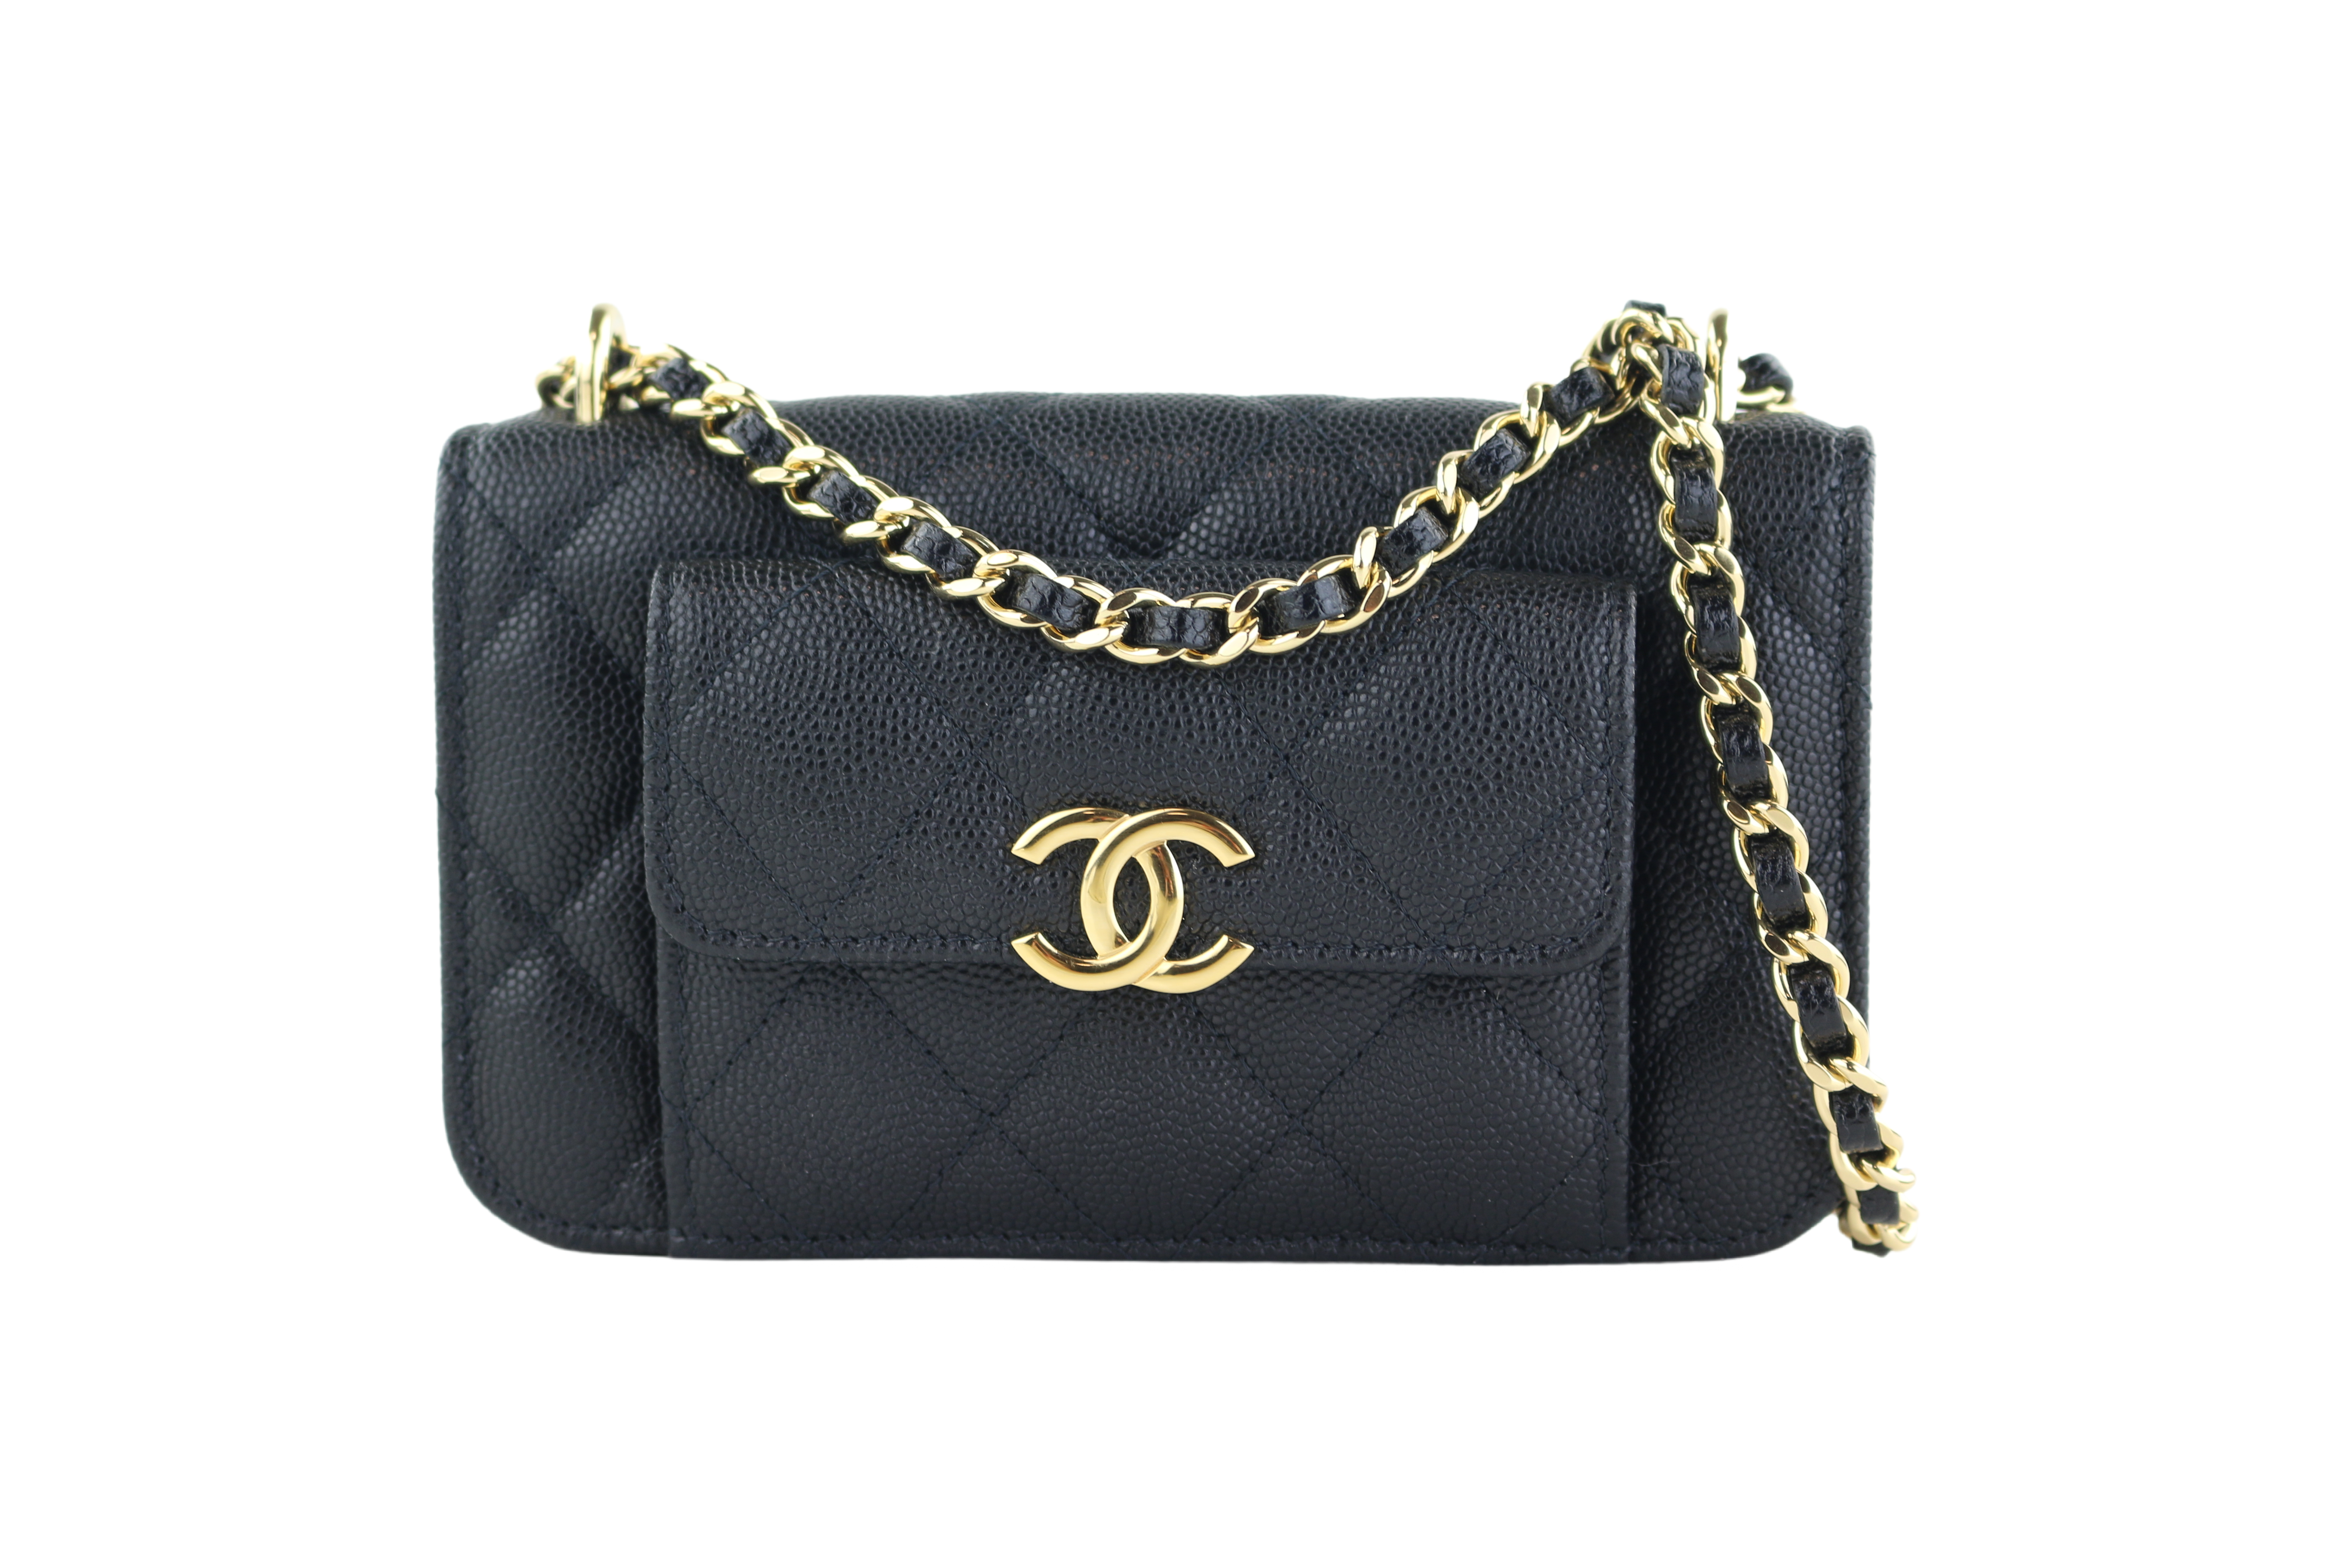 Chanel Authenticated Clutch Bag